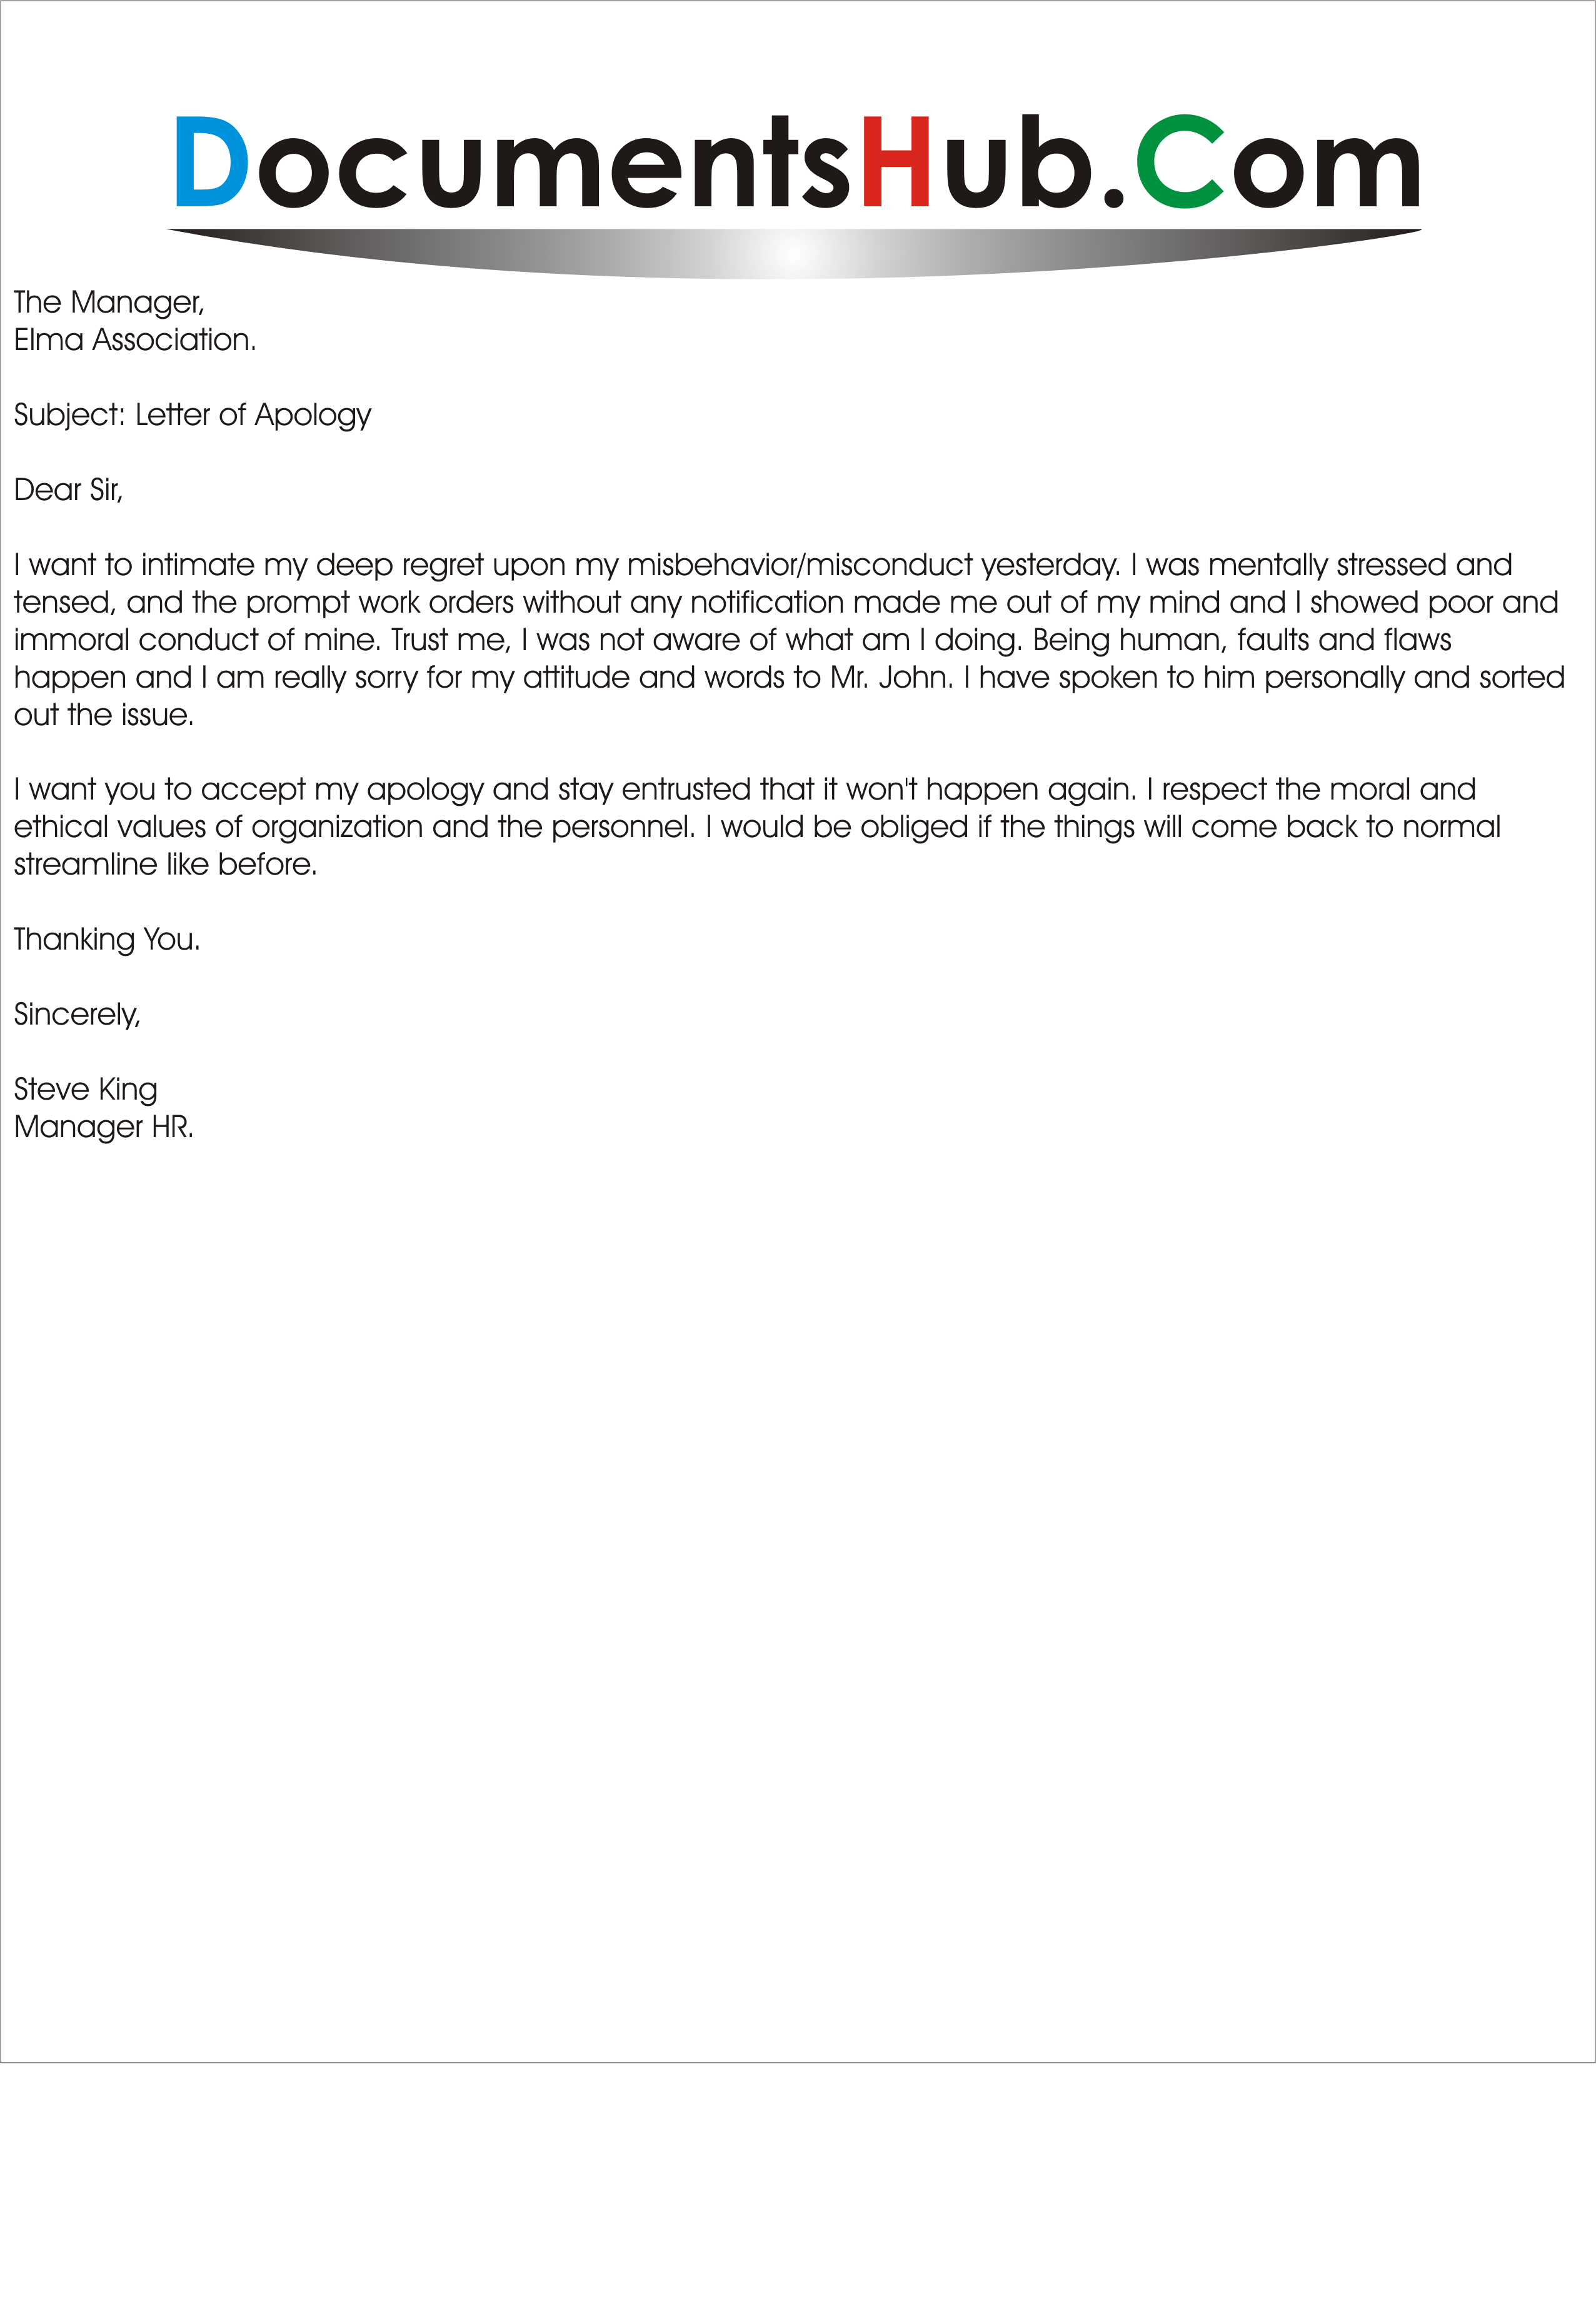 Apology Letter Absence Work Apology Letter to Employer